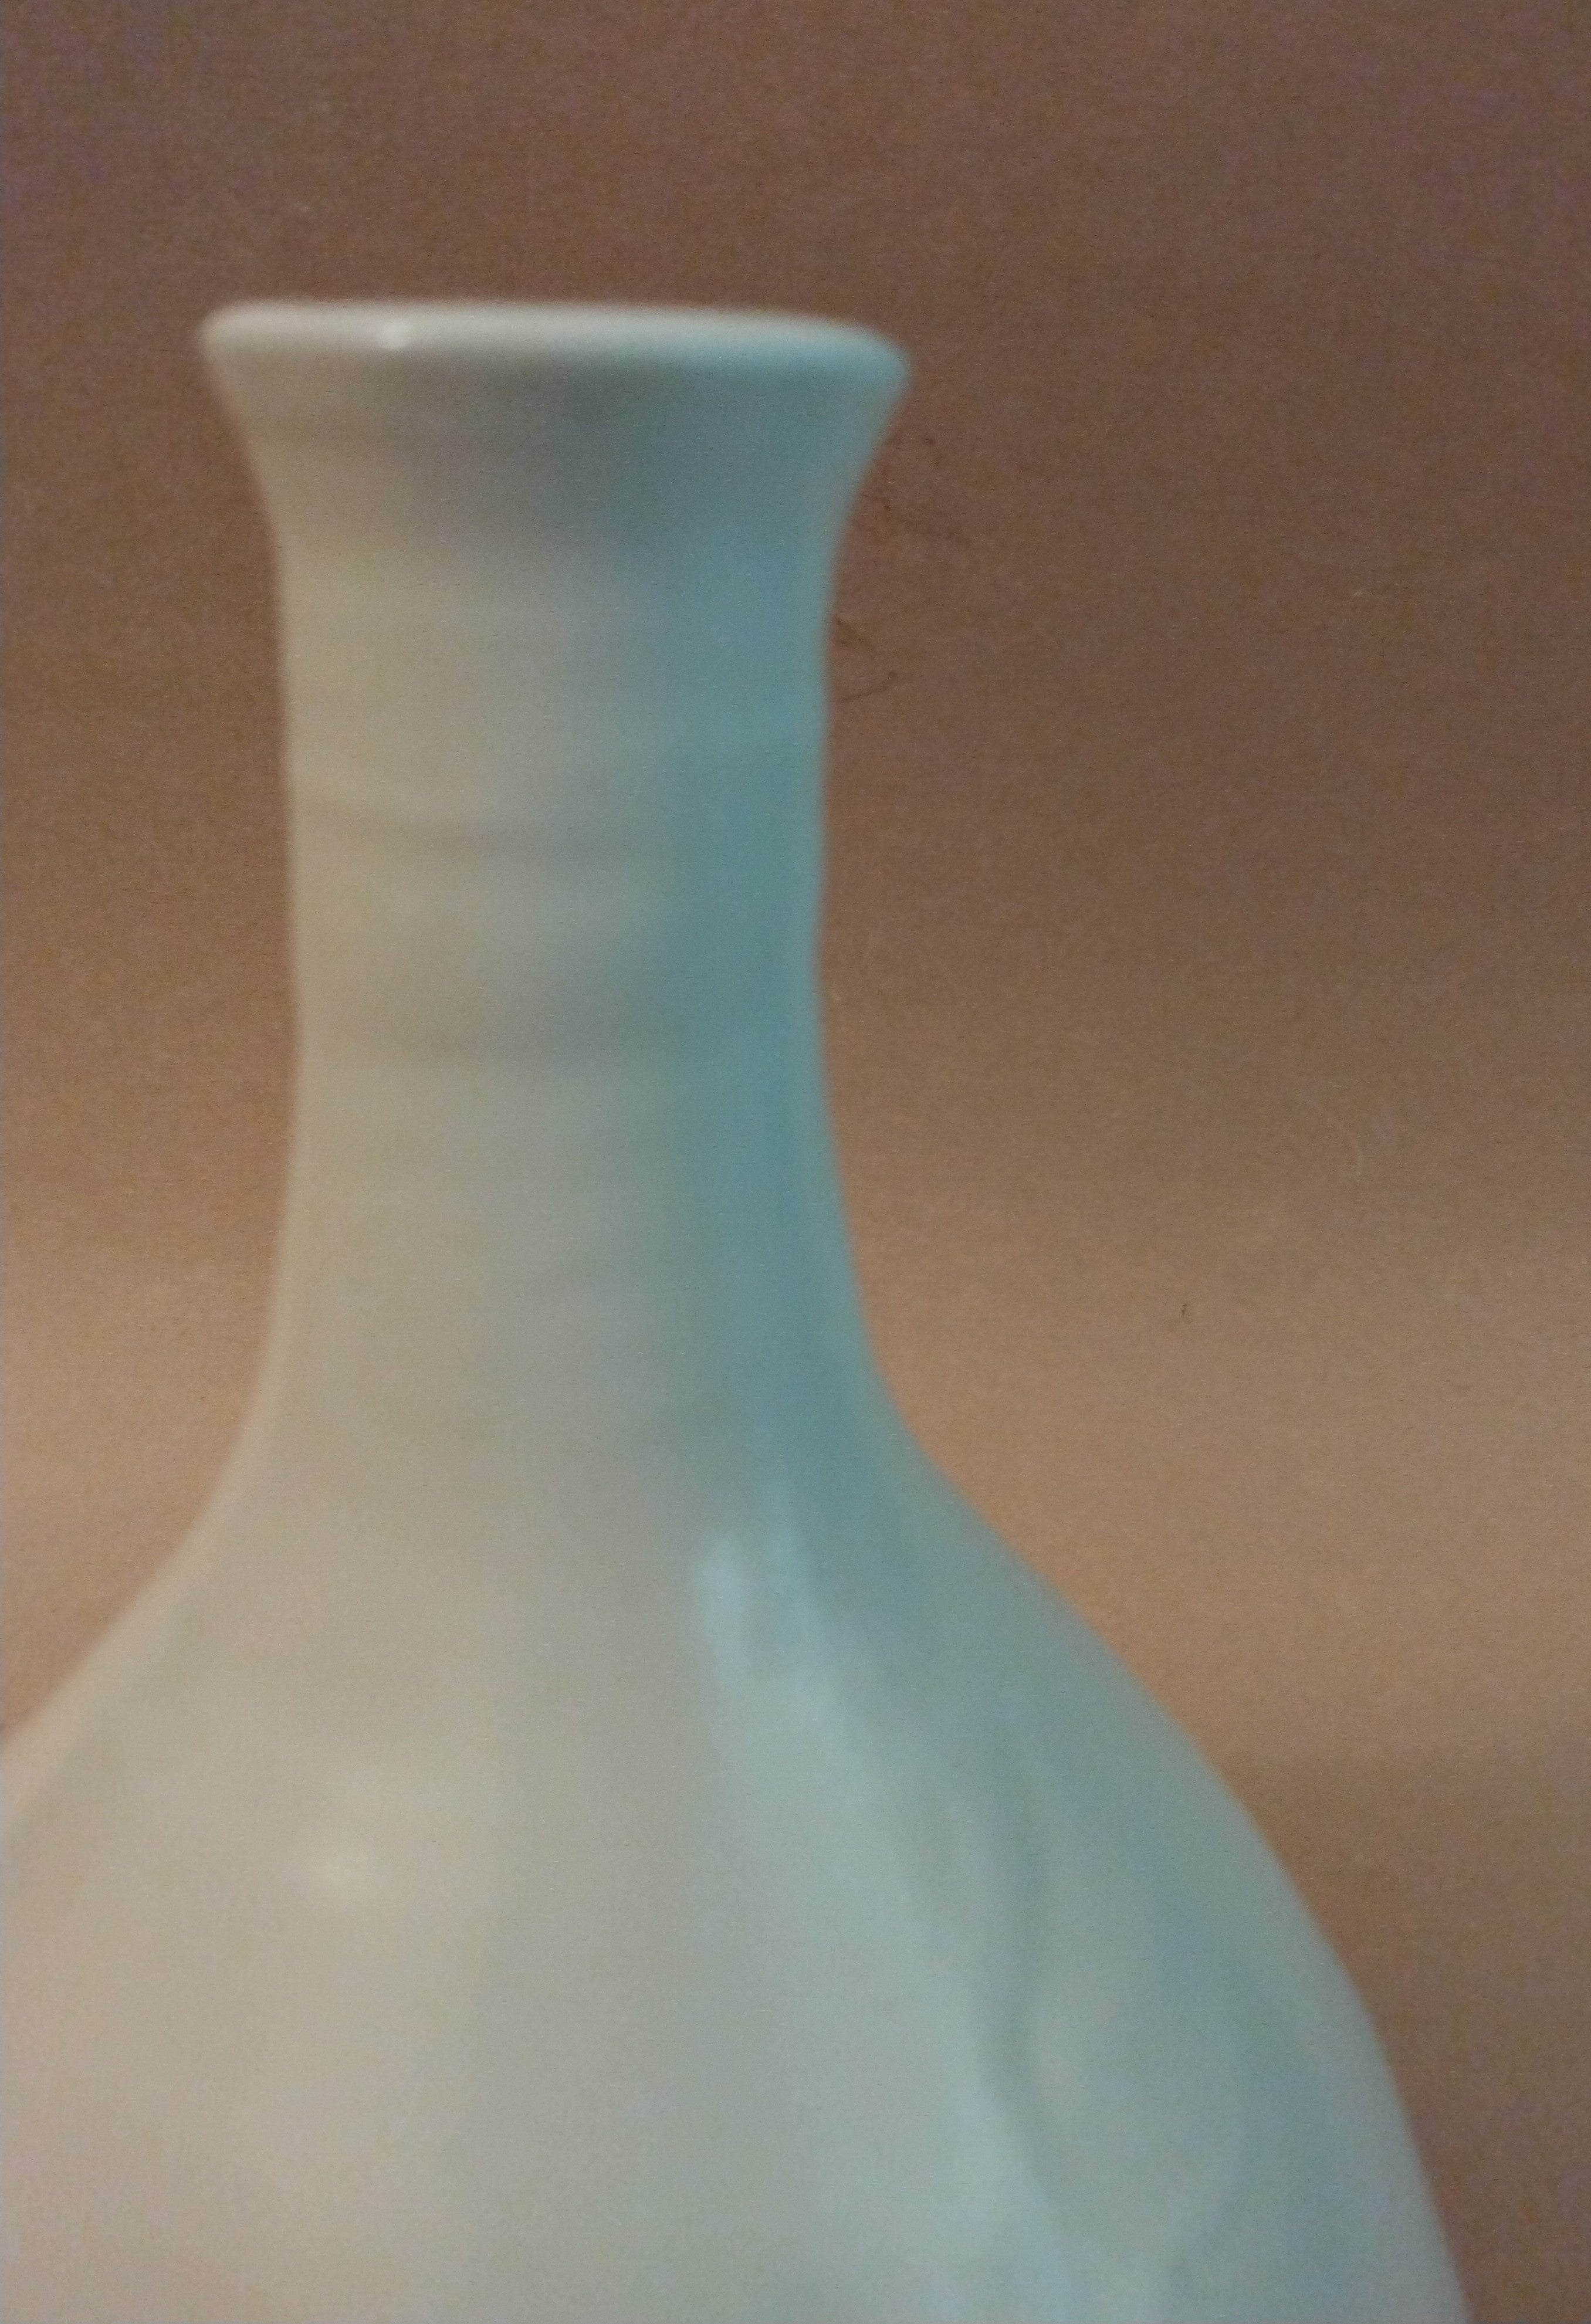 20% donated to Maui Wildfire Relief - Long-neck Vase by Sachiko Furuya